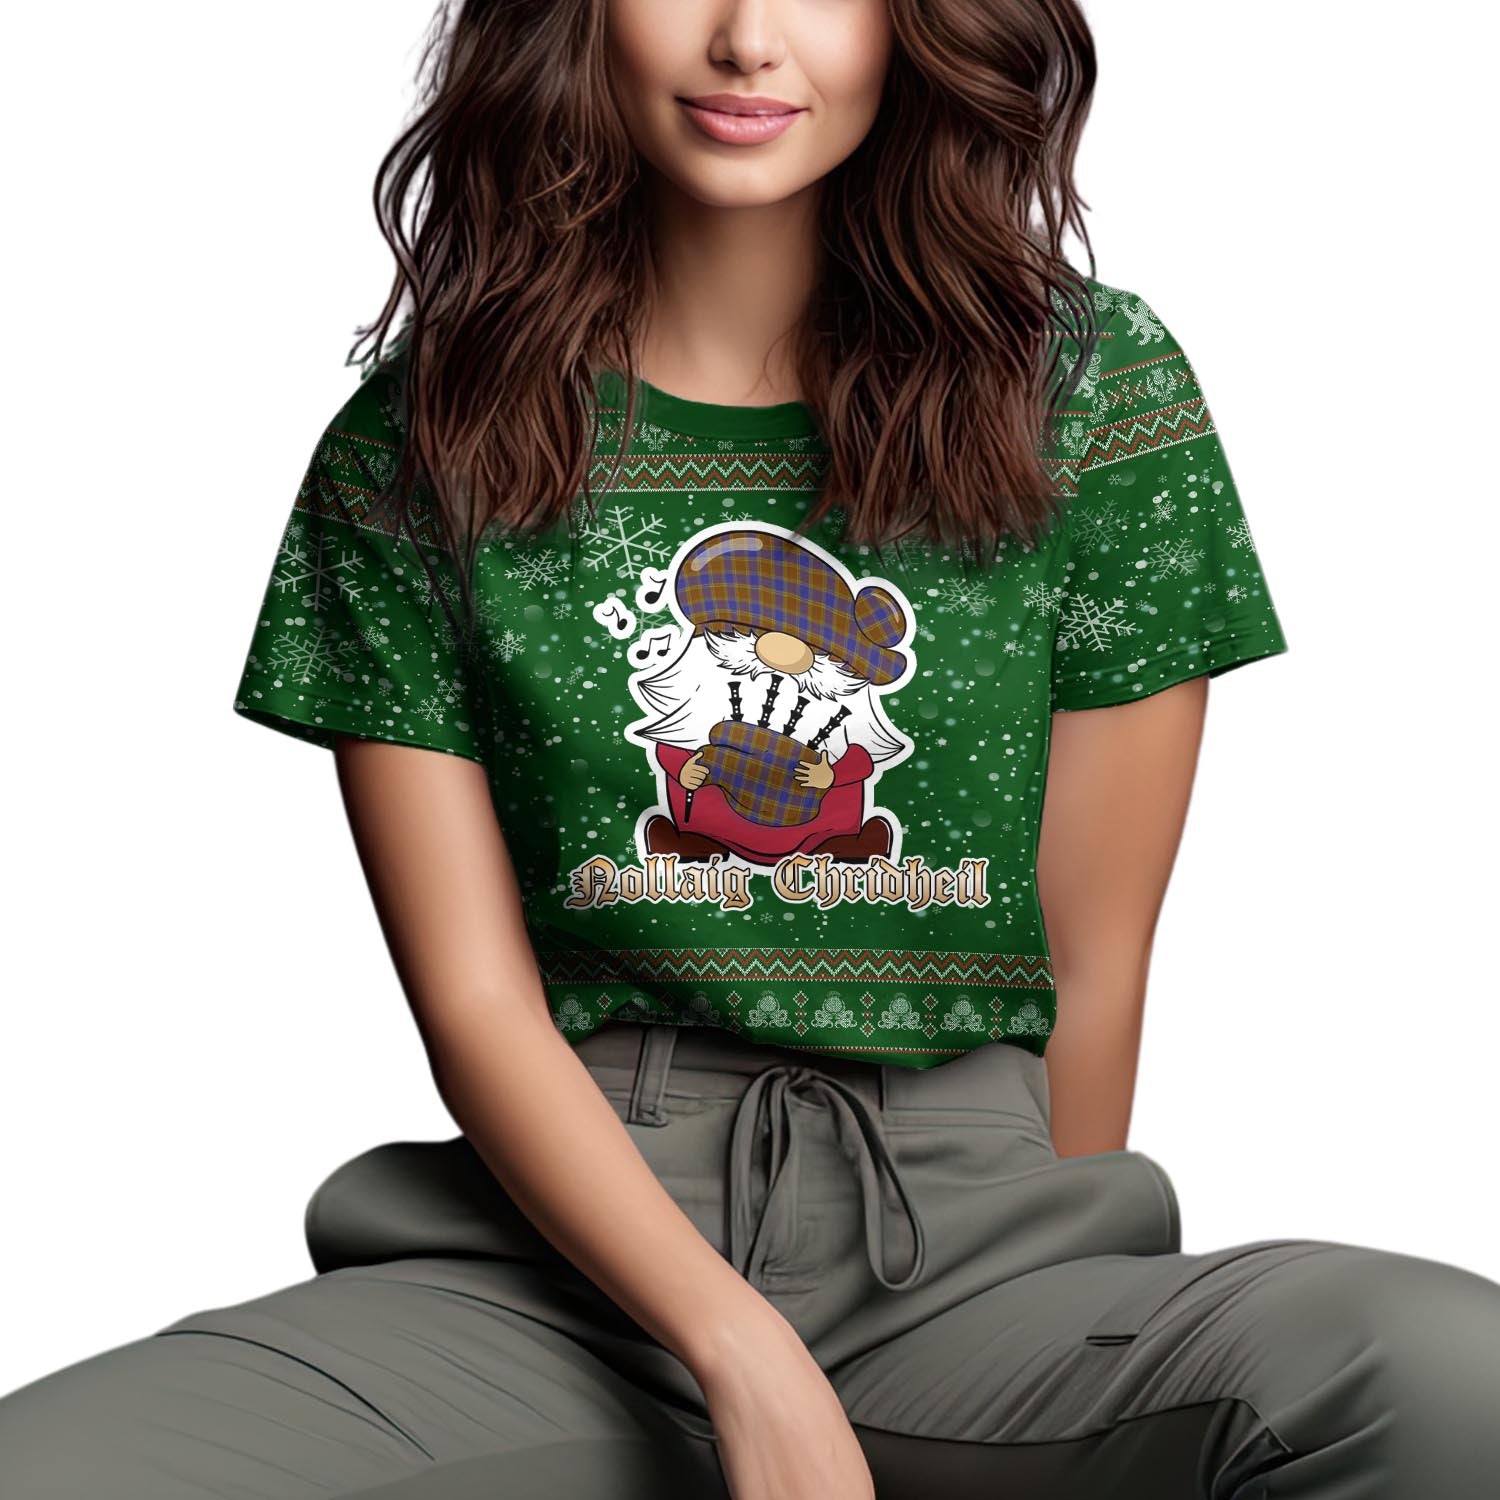 Balfour Modern Clan Christmas Family T-Shirt with Funny Gnome Playing Bagpipes Women's Shirt Green - Tartanvibesclothing